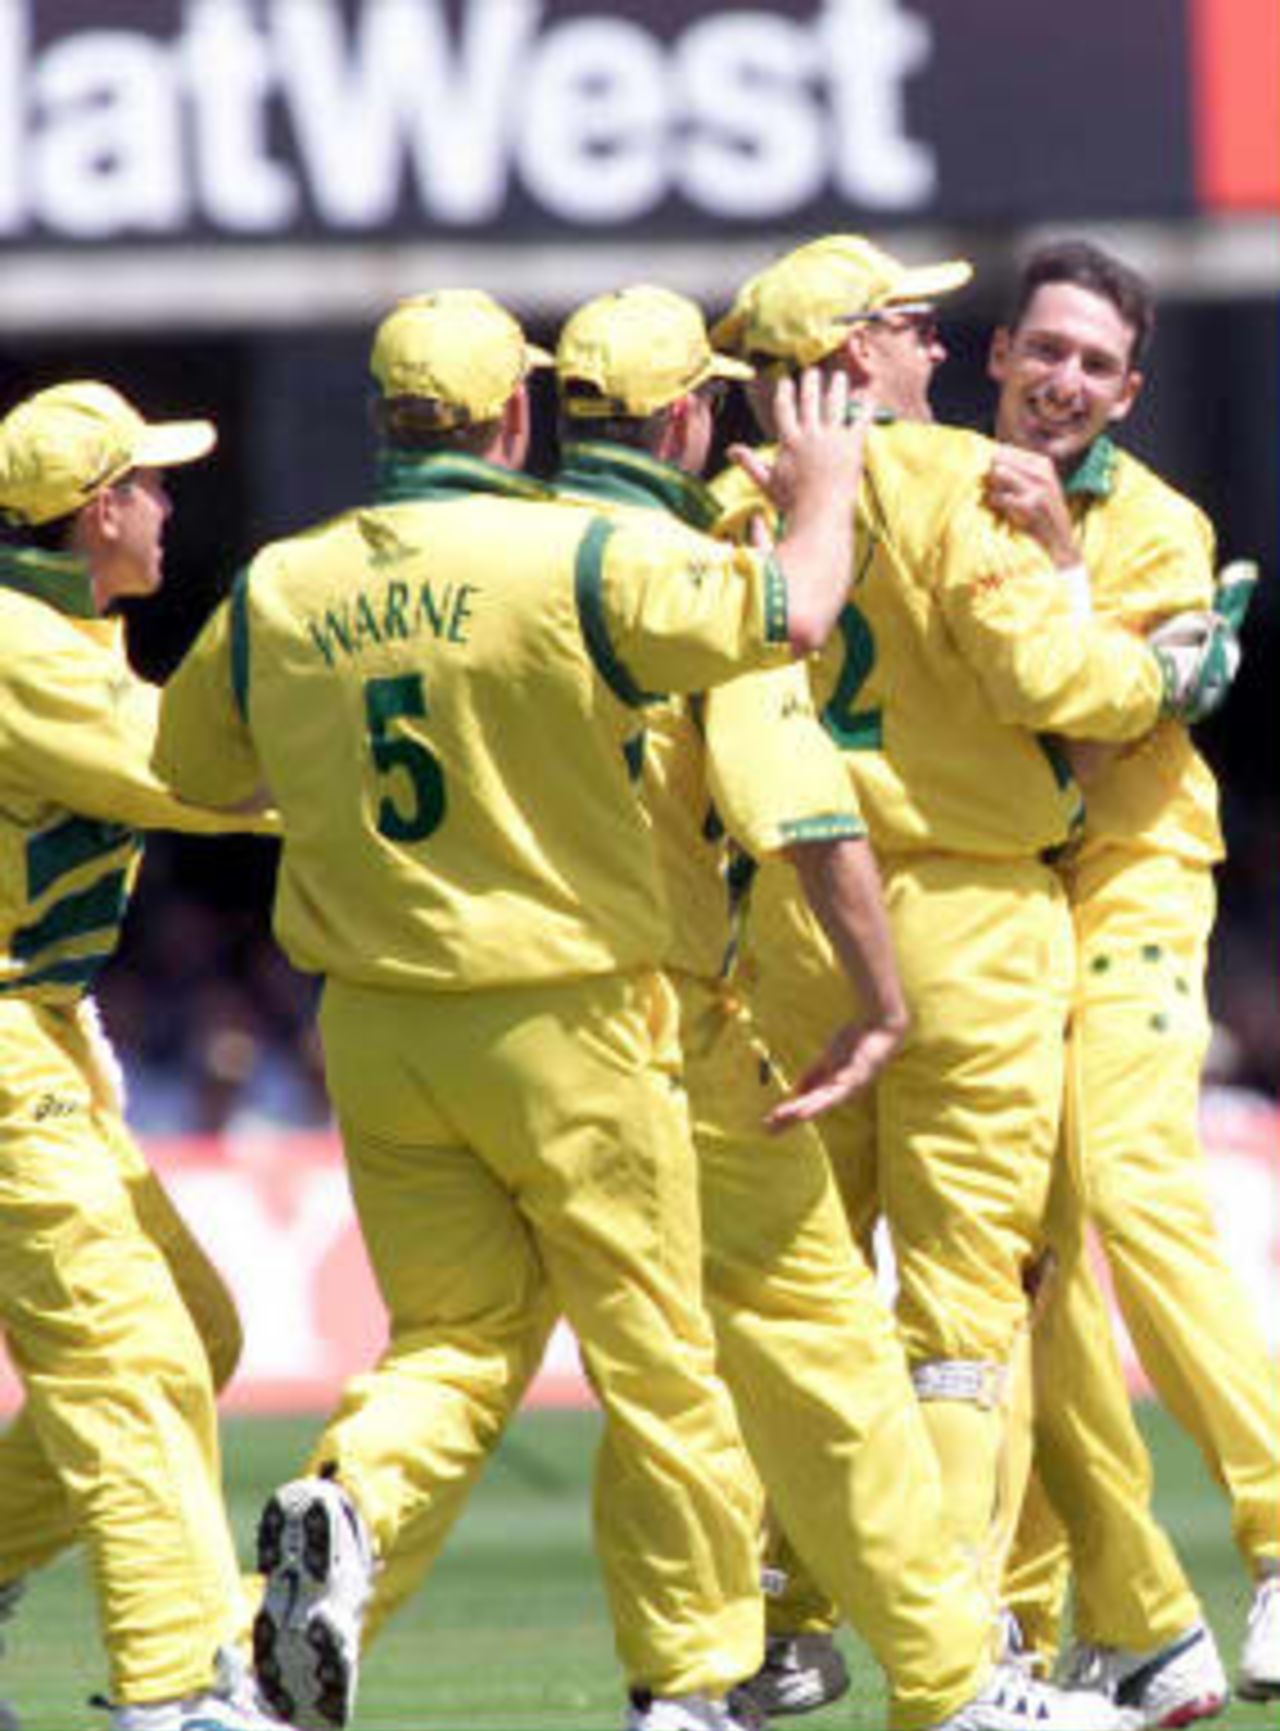 Australia celebrate the wicket of Saeed Anwar, who was bowled by Damien Fleming for 15 runs during the Cricket World Cup final at Lord's, London, 20 June 1999